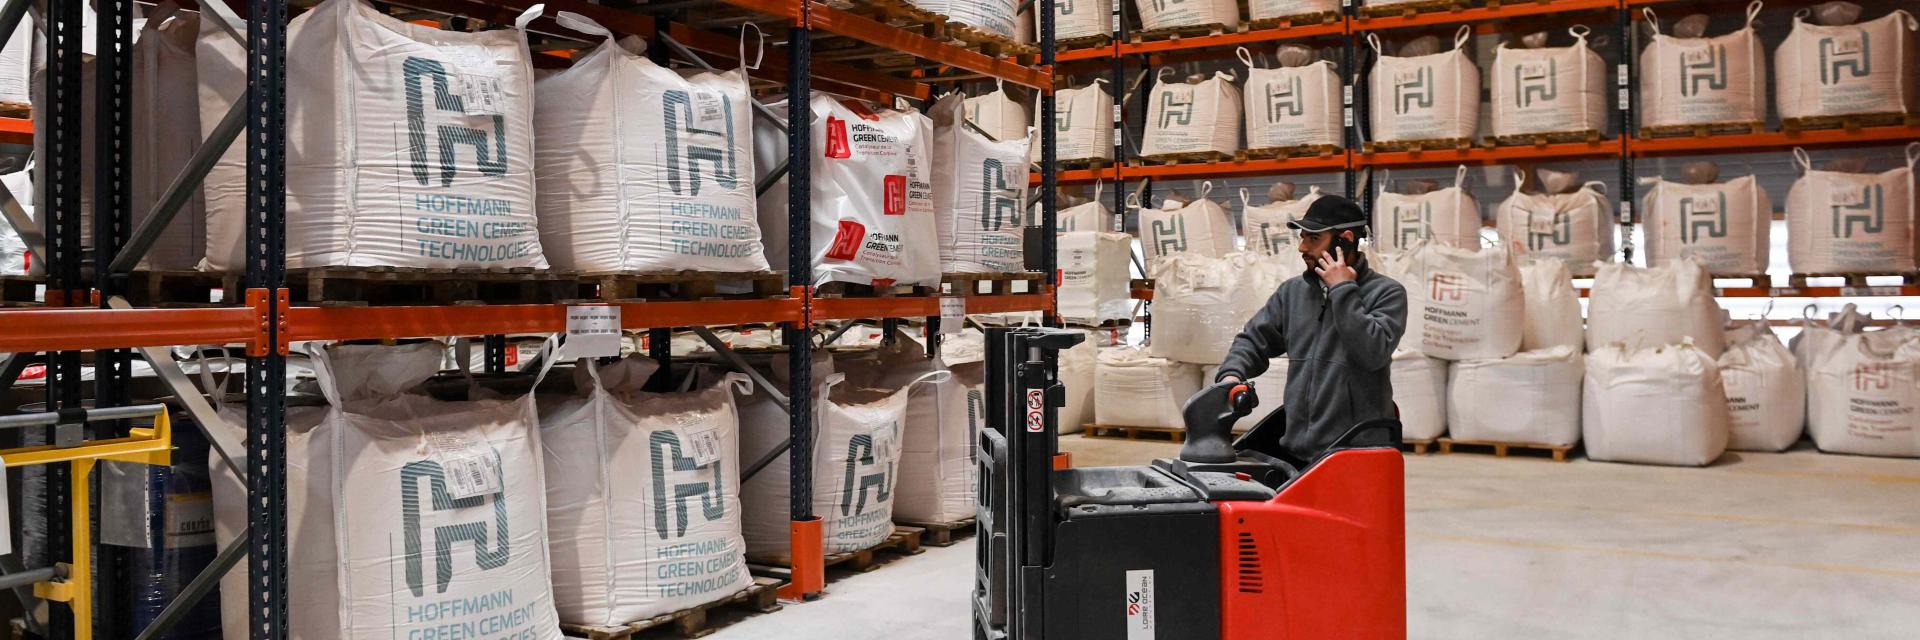 A Hoffmann Green Cement Technologies worker moves bags of cement with a forklift, in a storage room in the production site, in Bournezeau, western France.